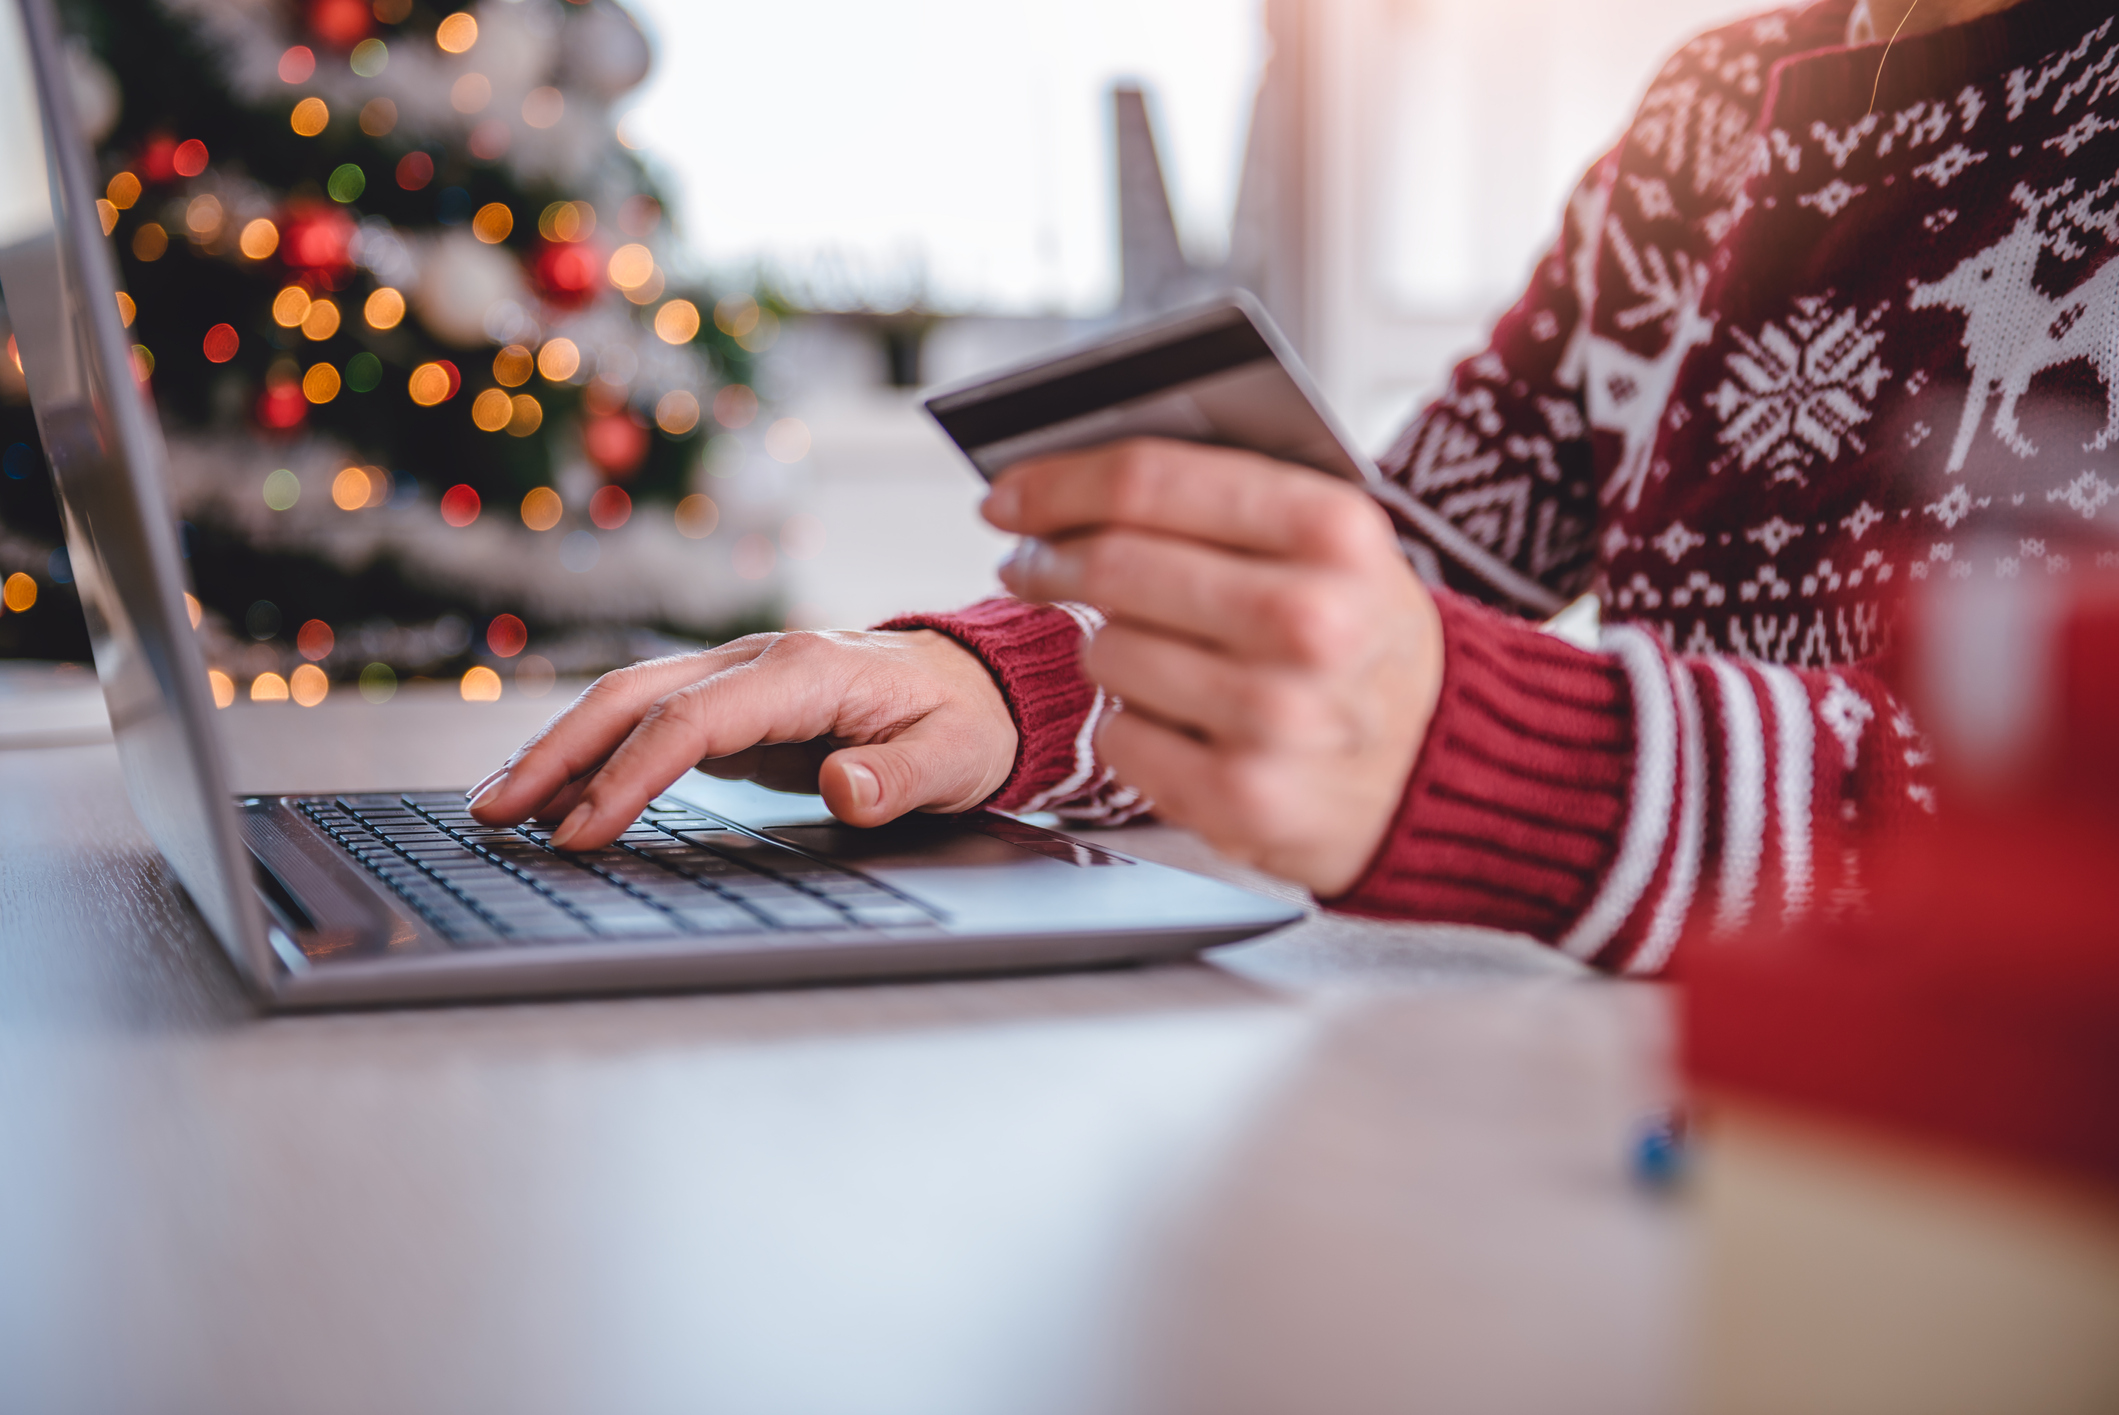 Cybersecurity for the Holiday Season